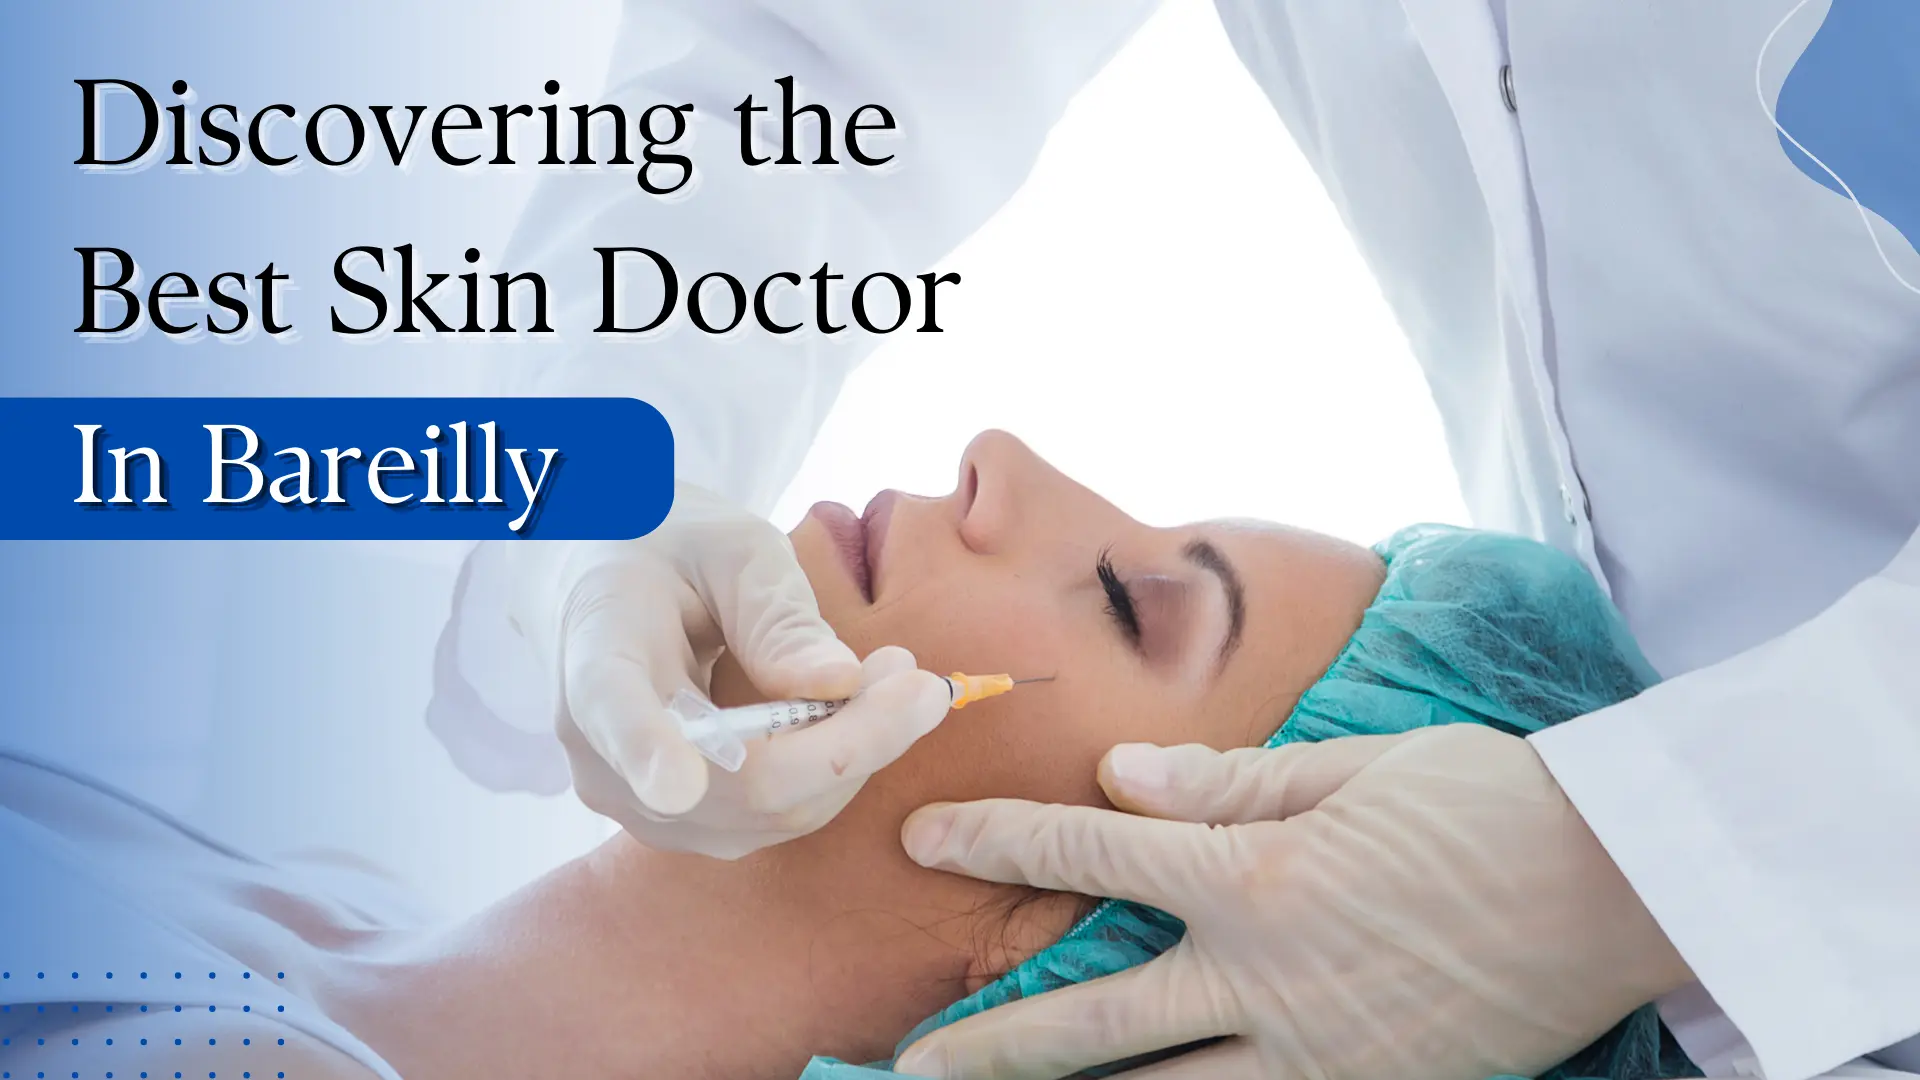 Discovering the Best Skin Doctor in Bareilly: Your Path to Healthy, Glowing Skin